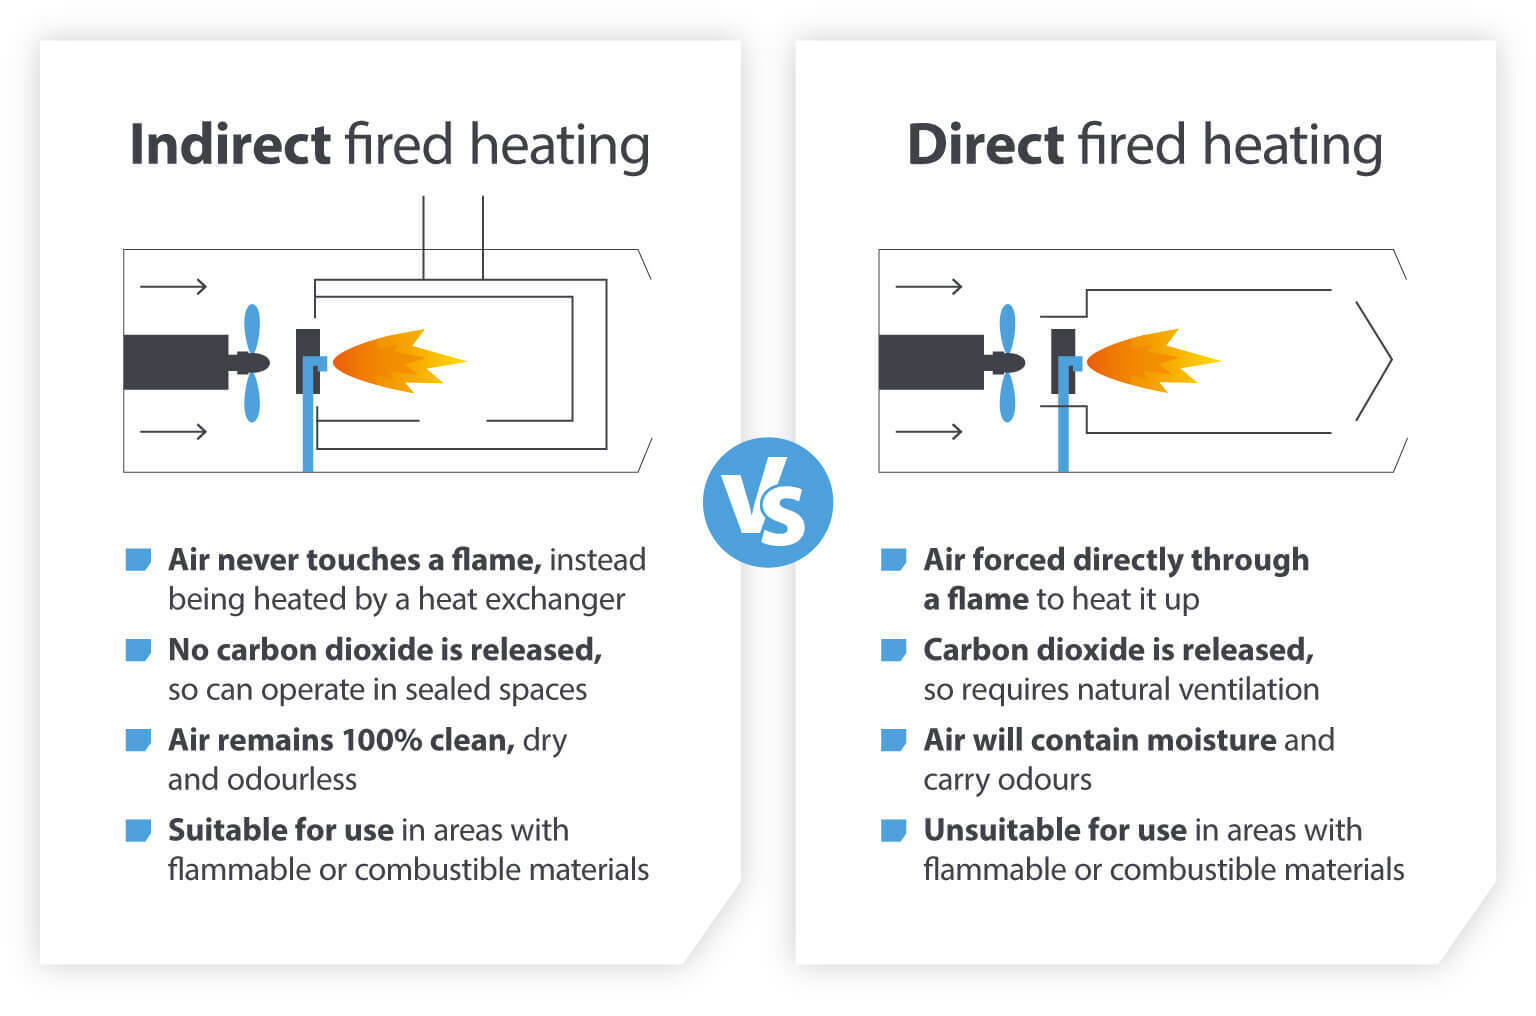 Indirect fired heating vs Direct fired heating